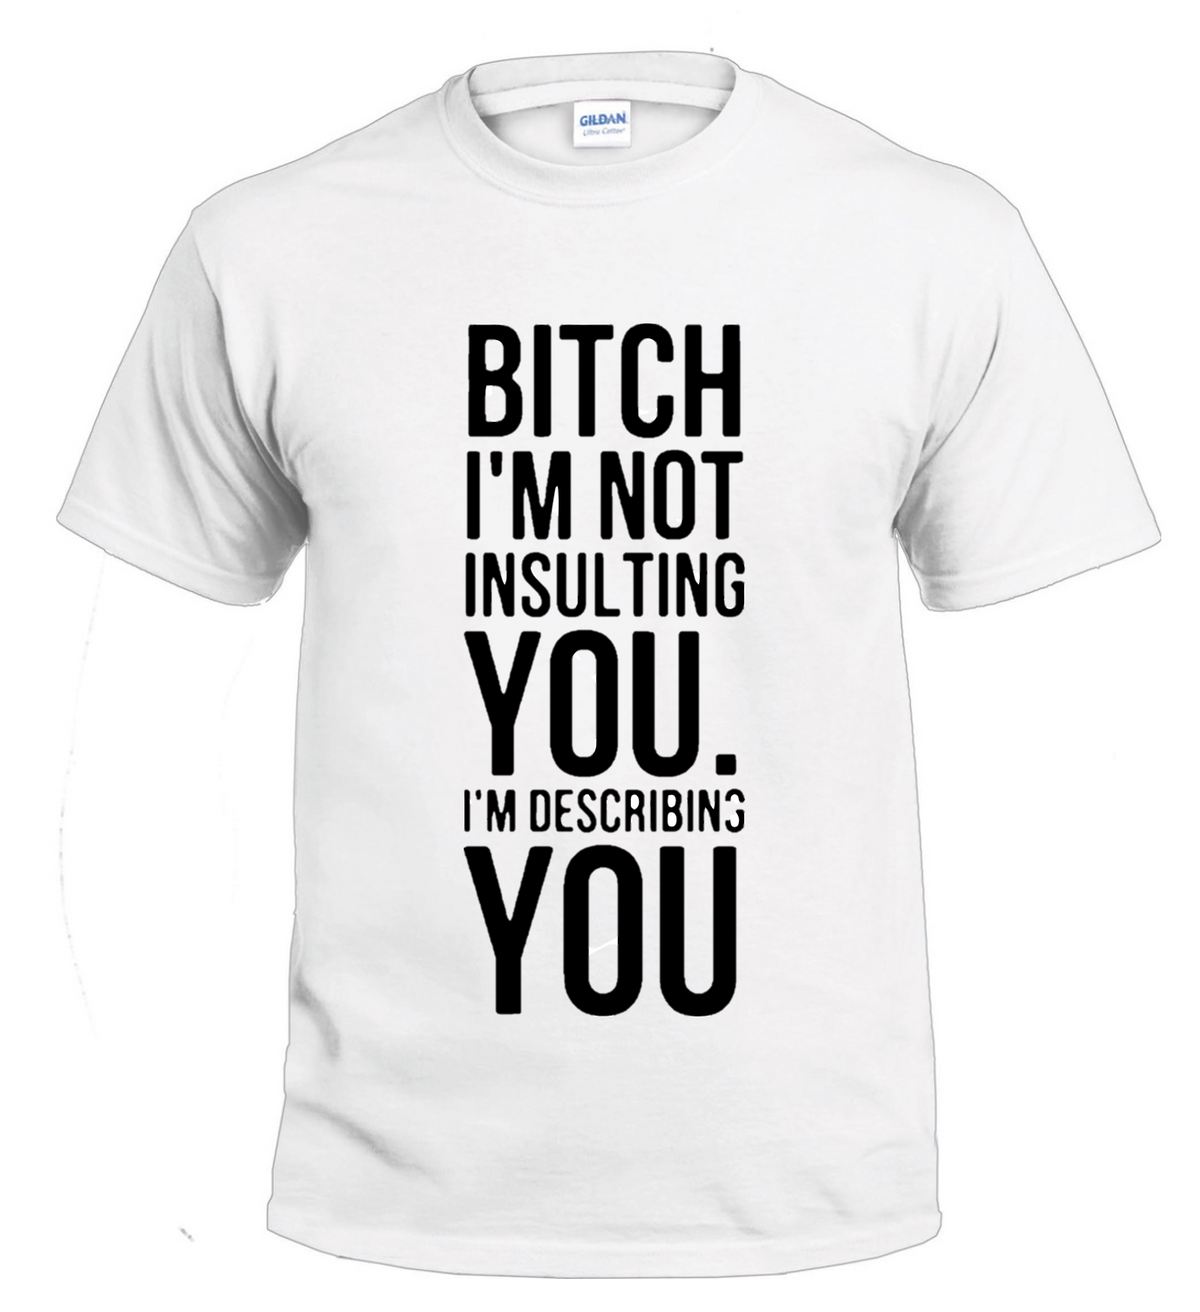 Bitch, I'm Not Insulting You Sassy t-shirt